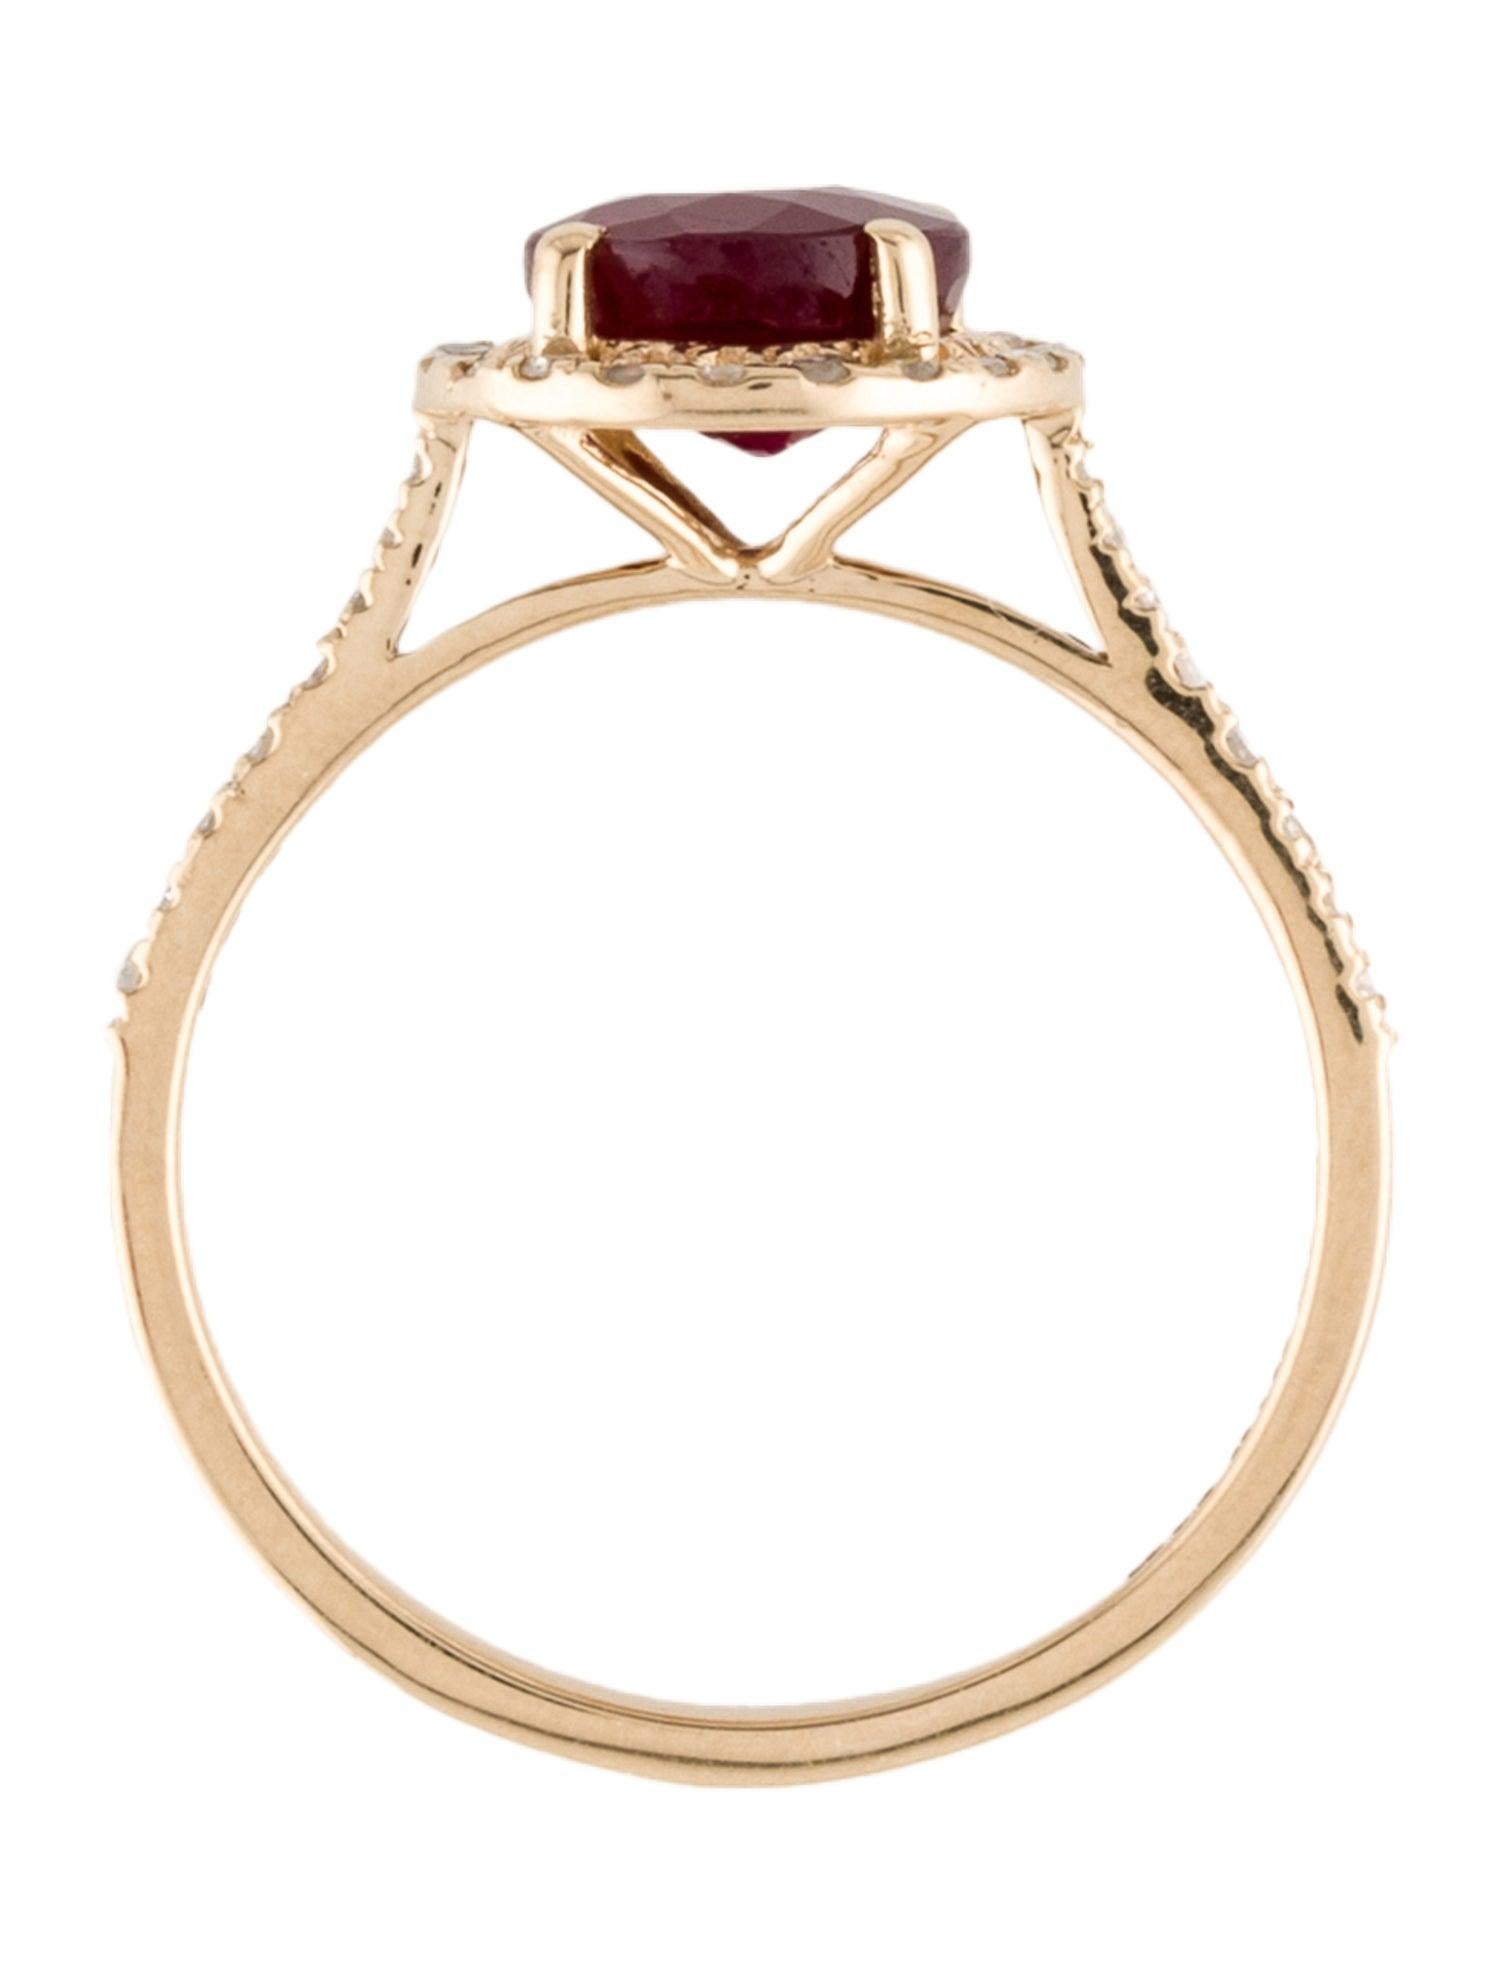 Captivating 14K Gold 1.66ct Ruby & Diamond Cocktail Ring - Size 7 - Fine Jewelry In New Condition For Sale In Holtsville, NY